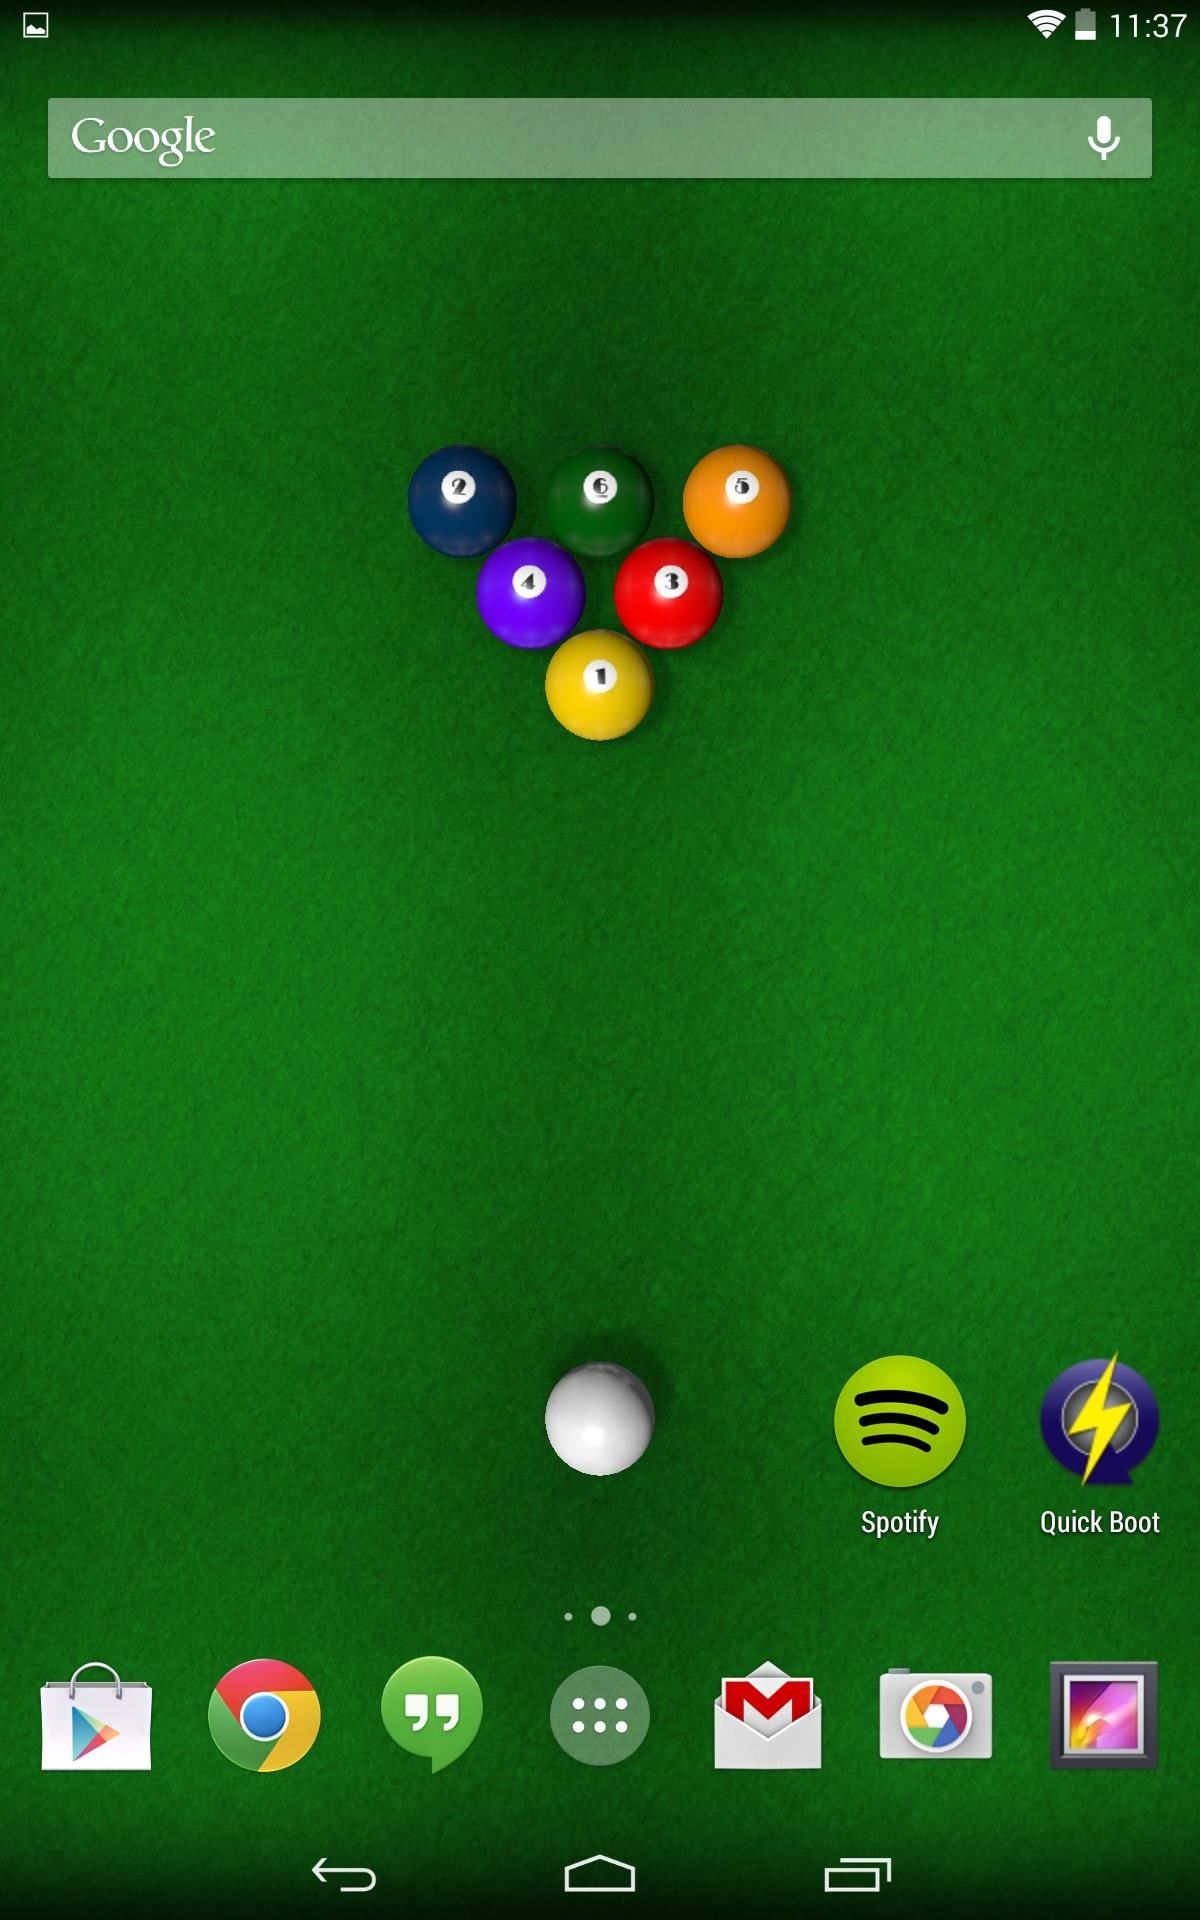 Boredom Killer: How to Play a Game of Pool Directly on Your Android Home Screen